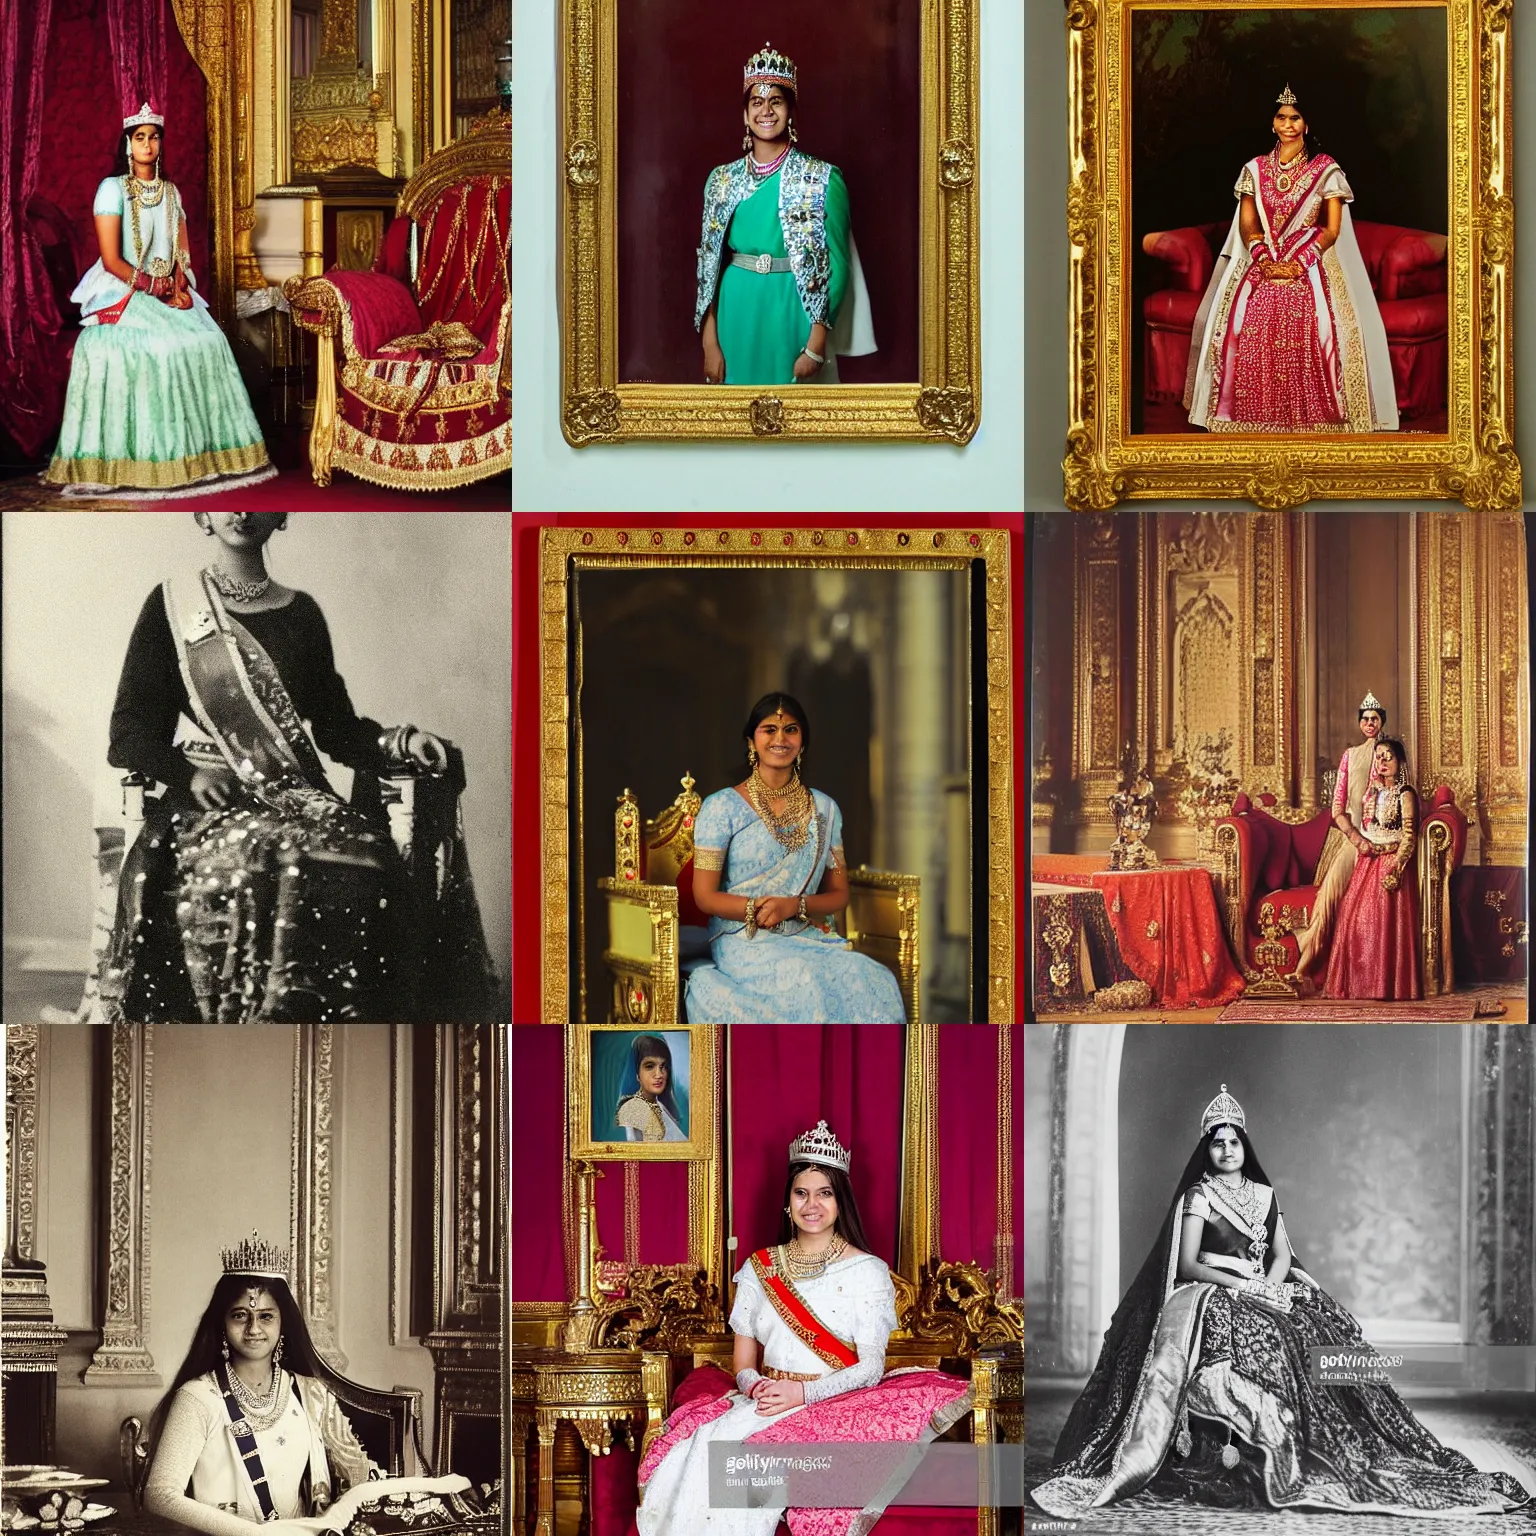 Prompt: Official photo portrait of a teenage Indian girl as the Queen of England, interior of Buckingham Palace